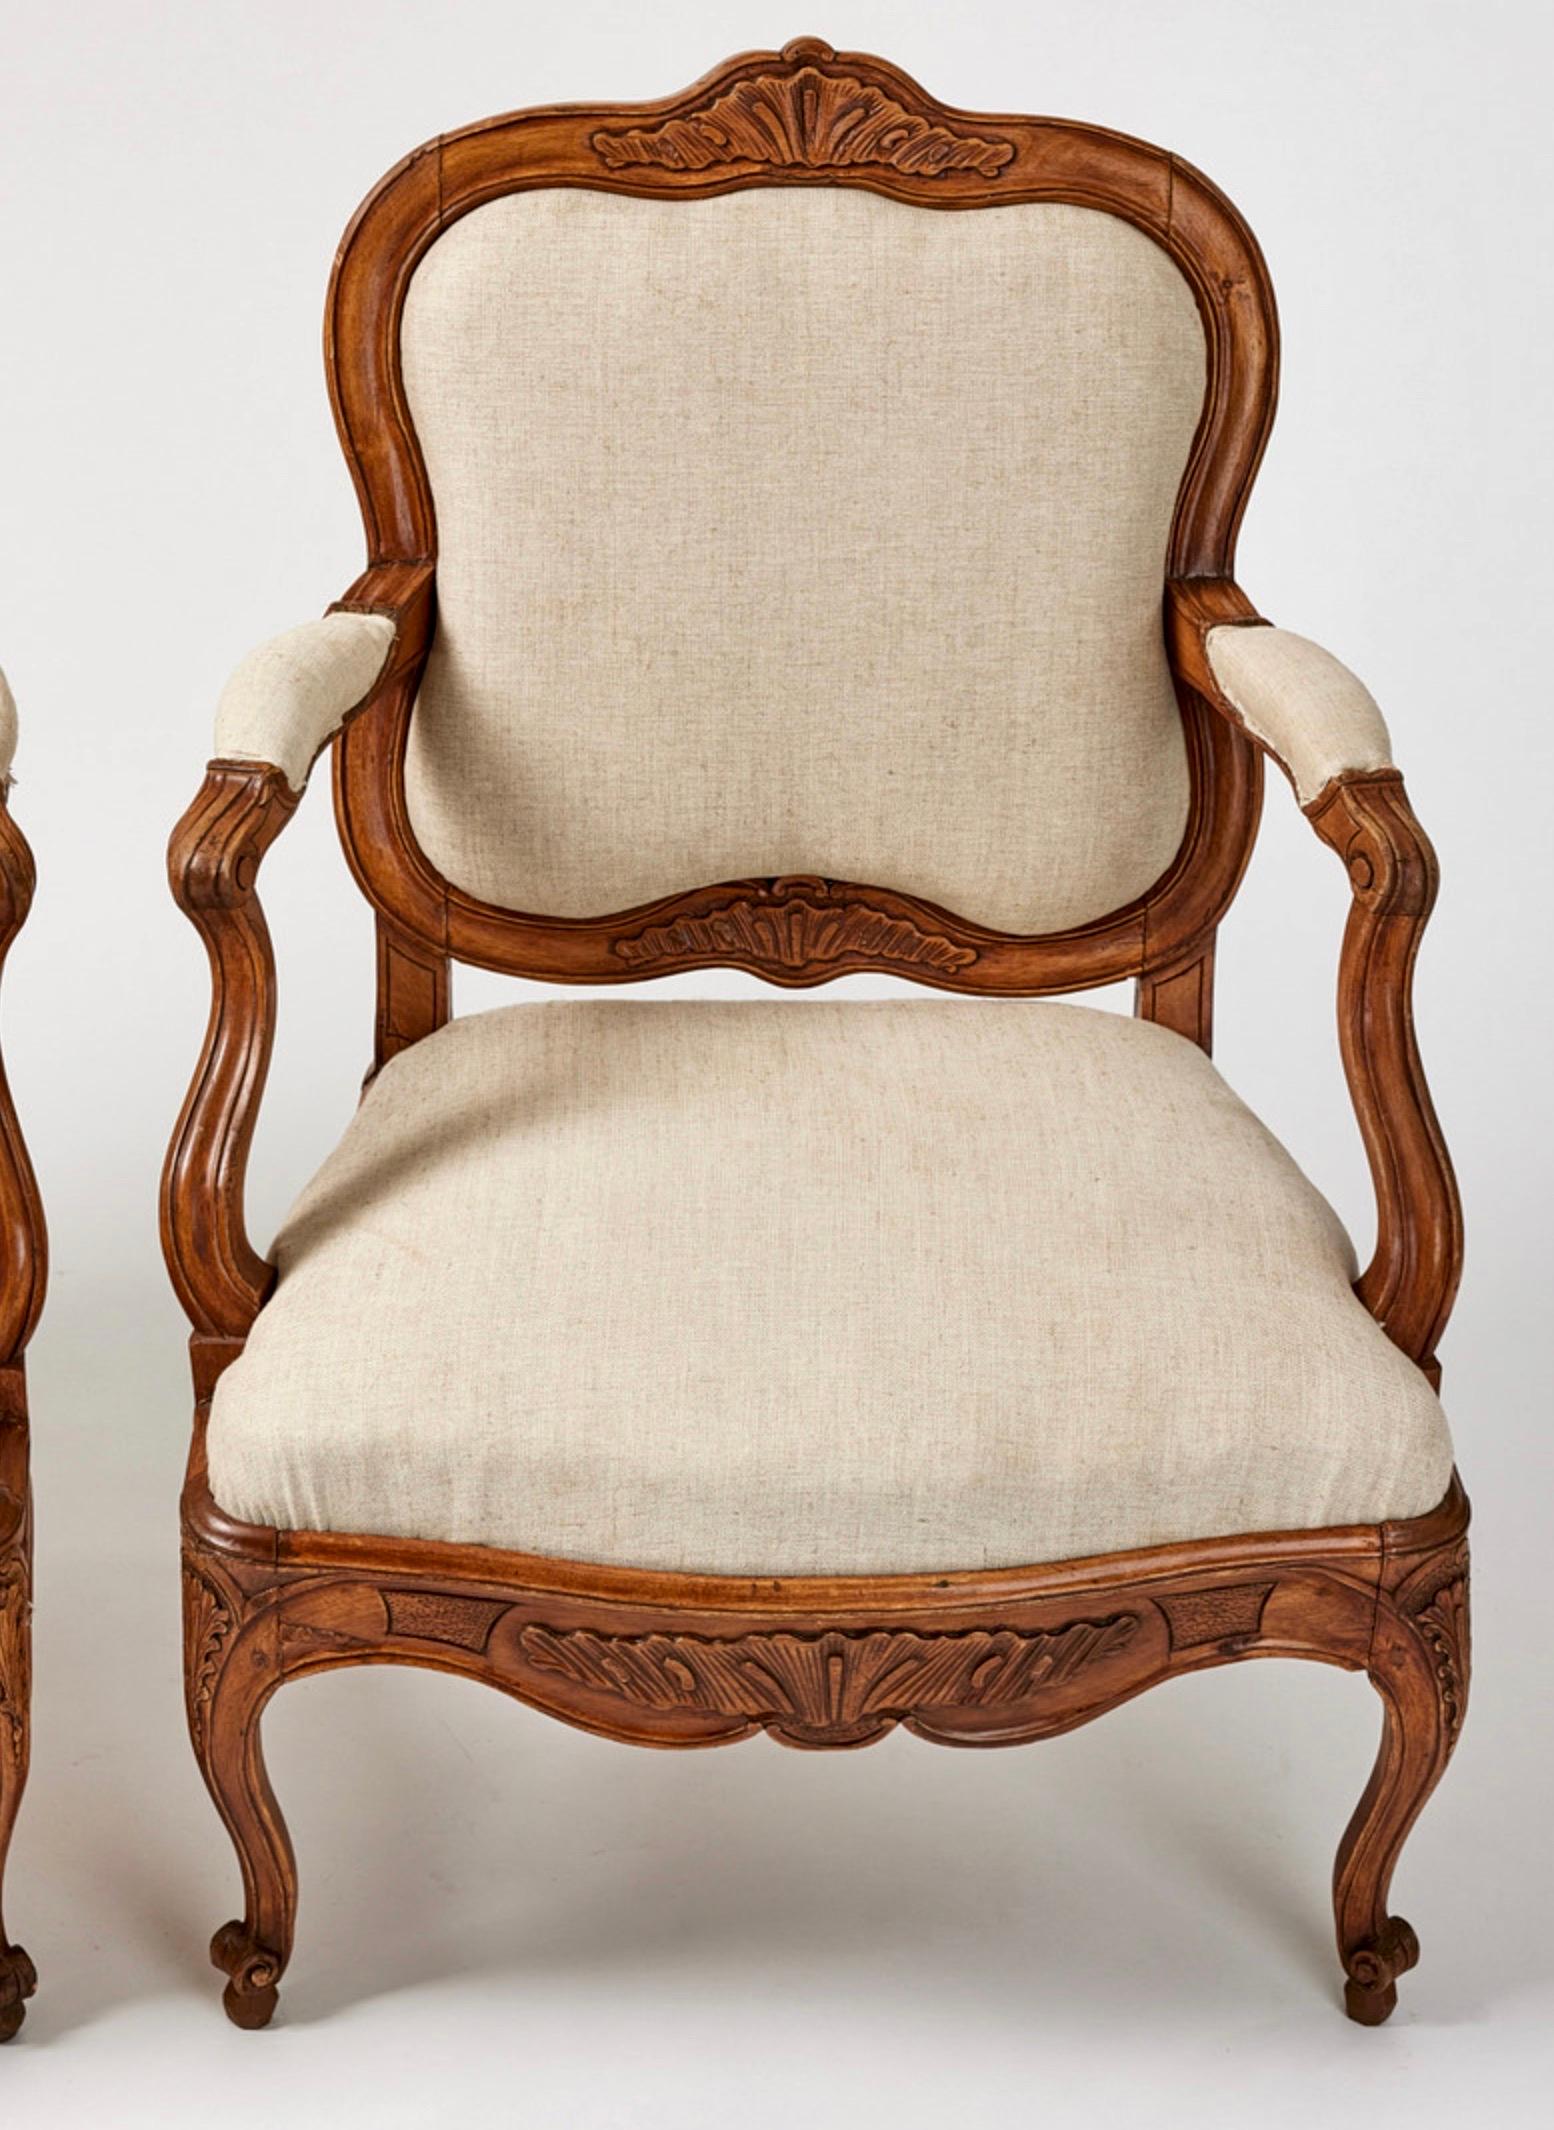 A pair of Swedish rococo armchairs made around 1760 in Stockholm. They are of a large and comfortable size. The carvings are of good quality with typical rococo shapes. The condition is top of the line.